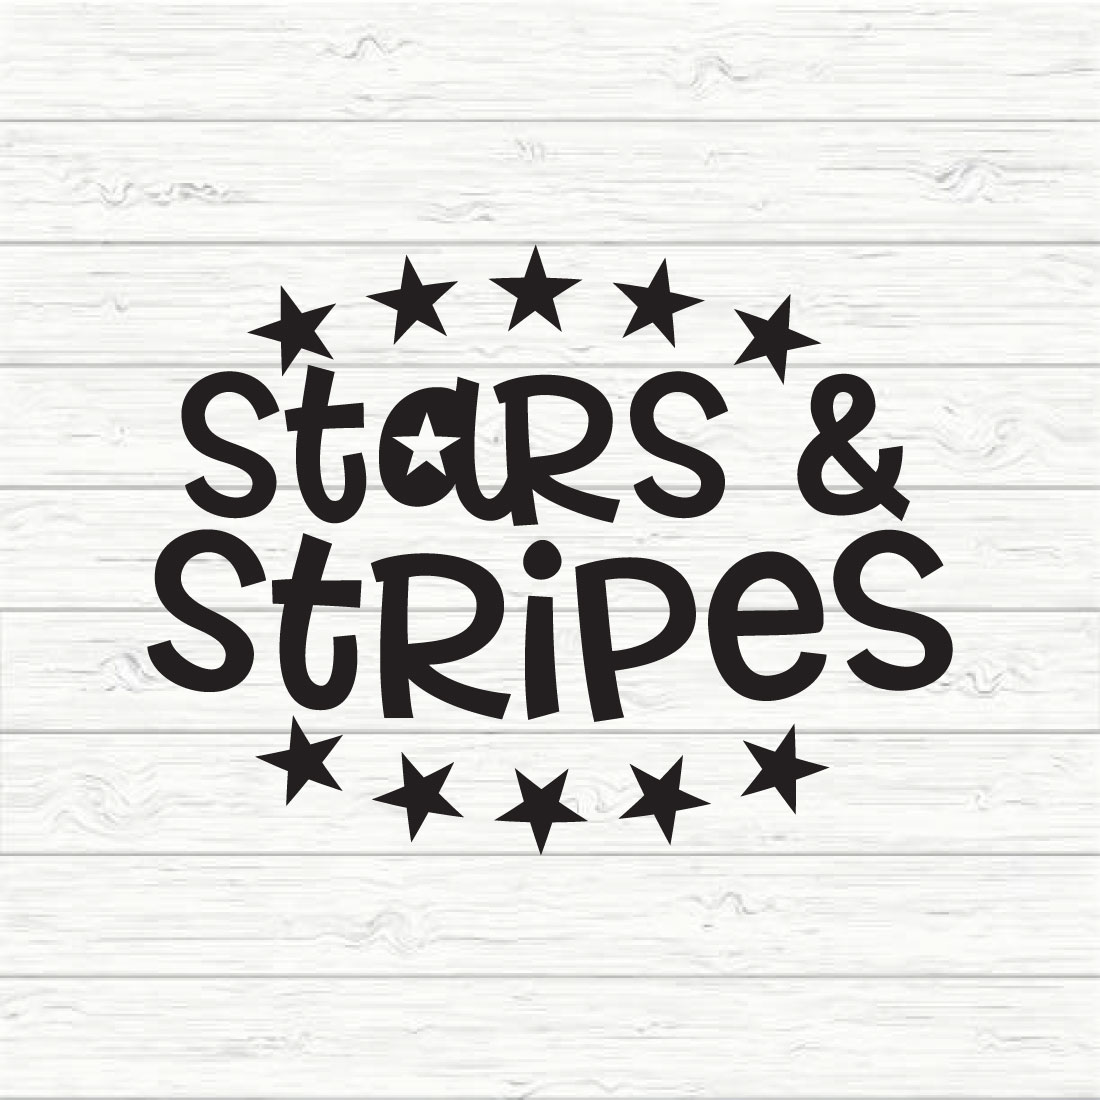 Stars & Stripes preview image.